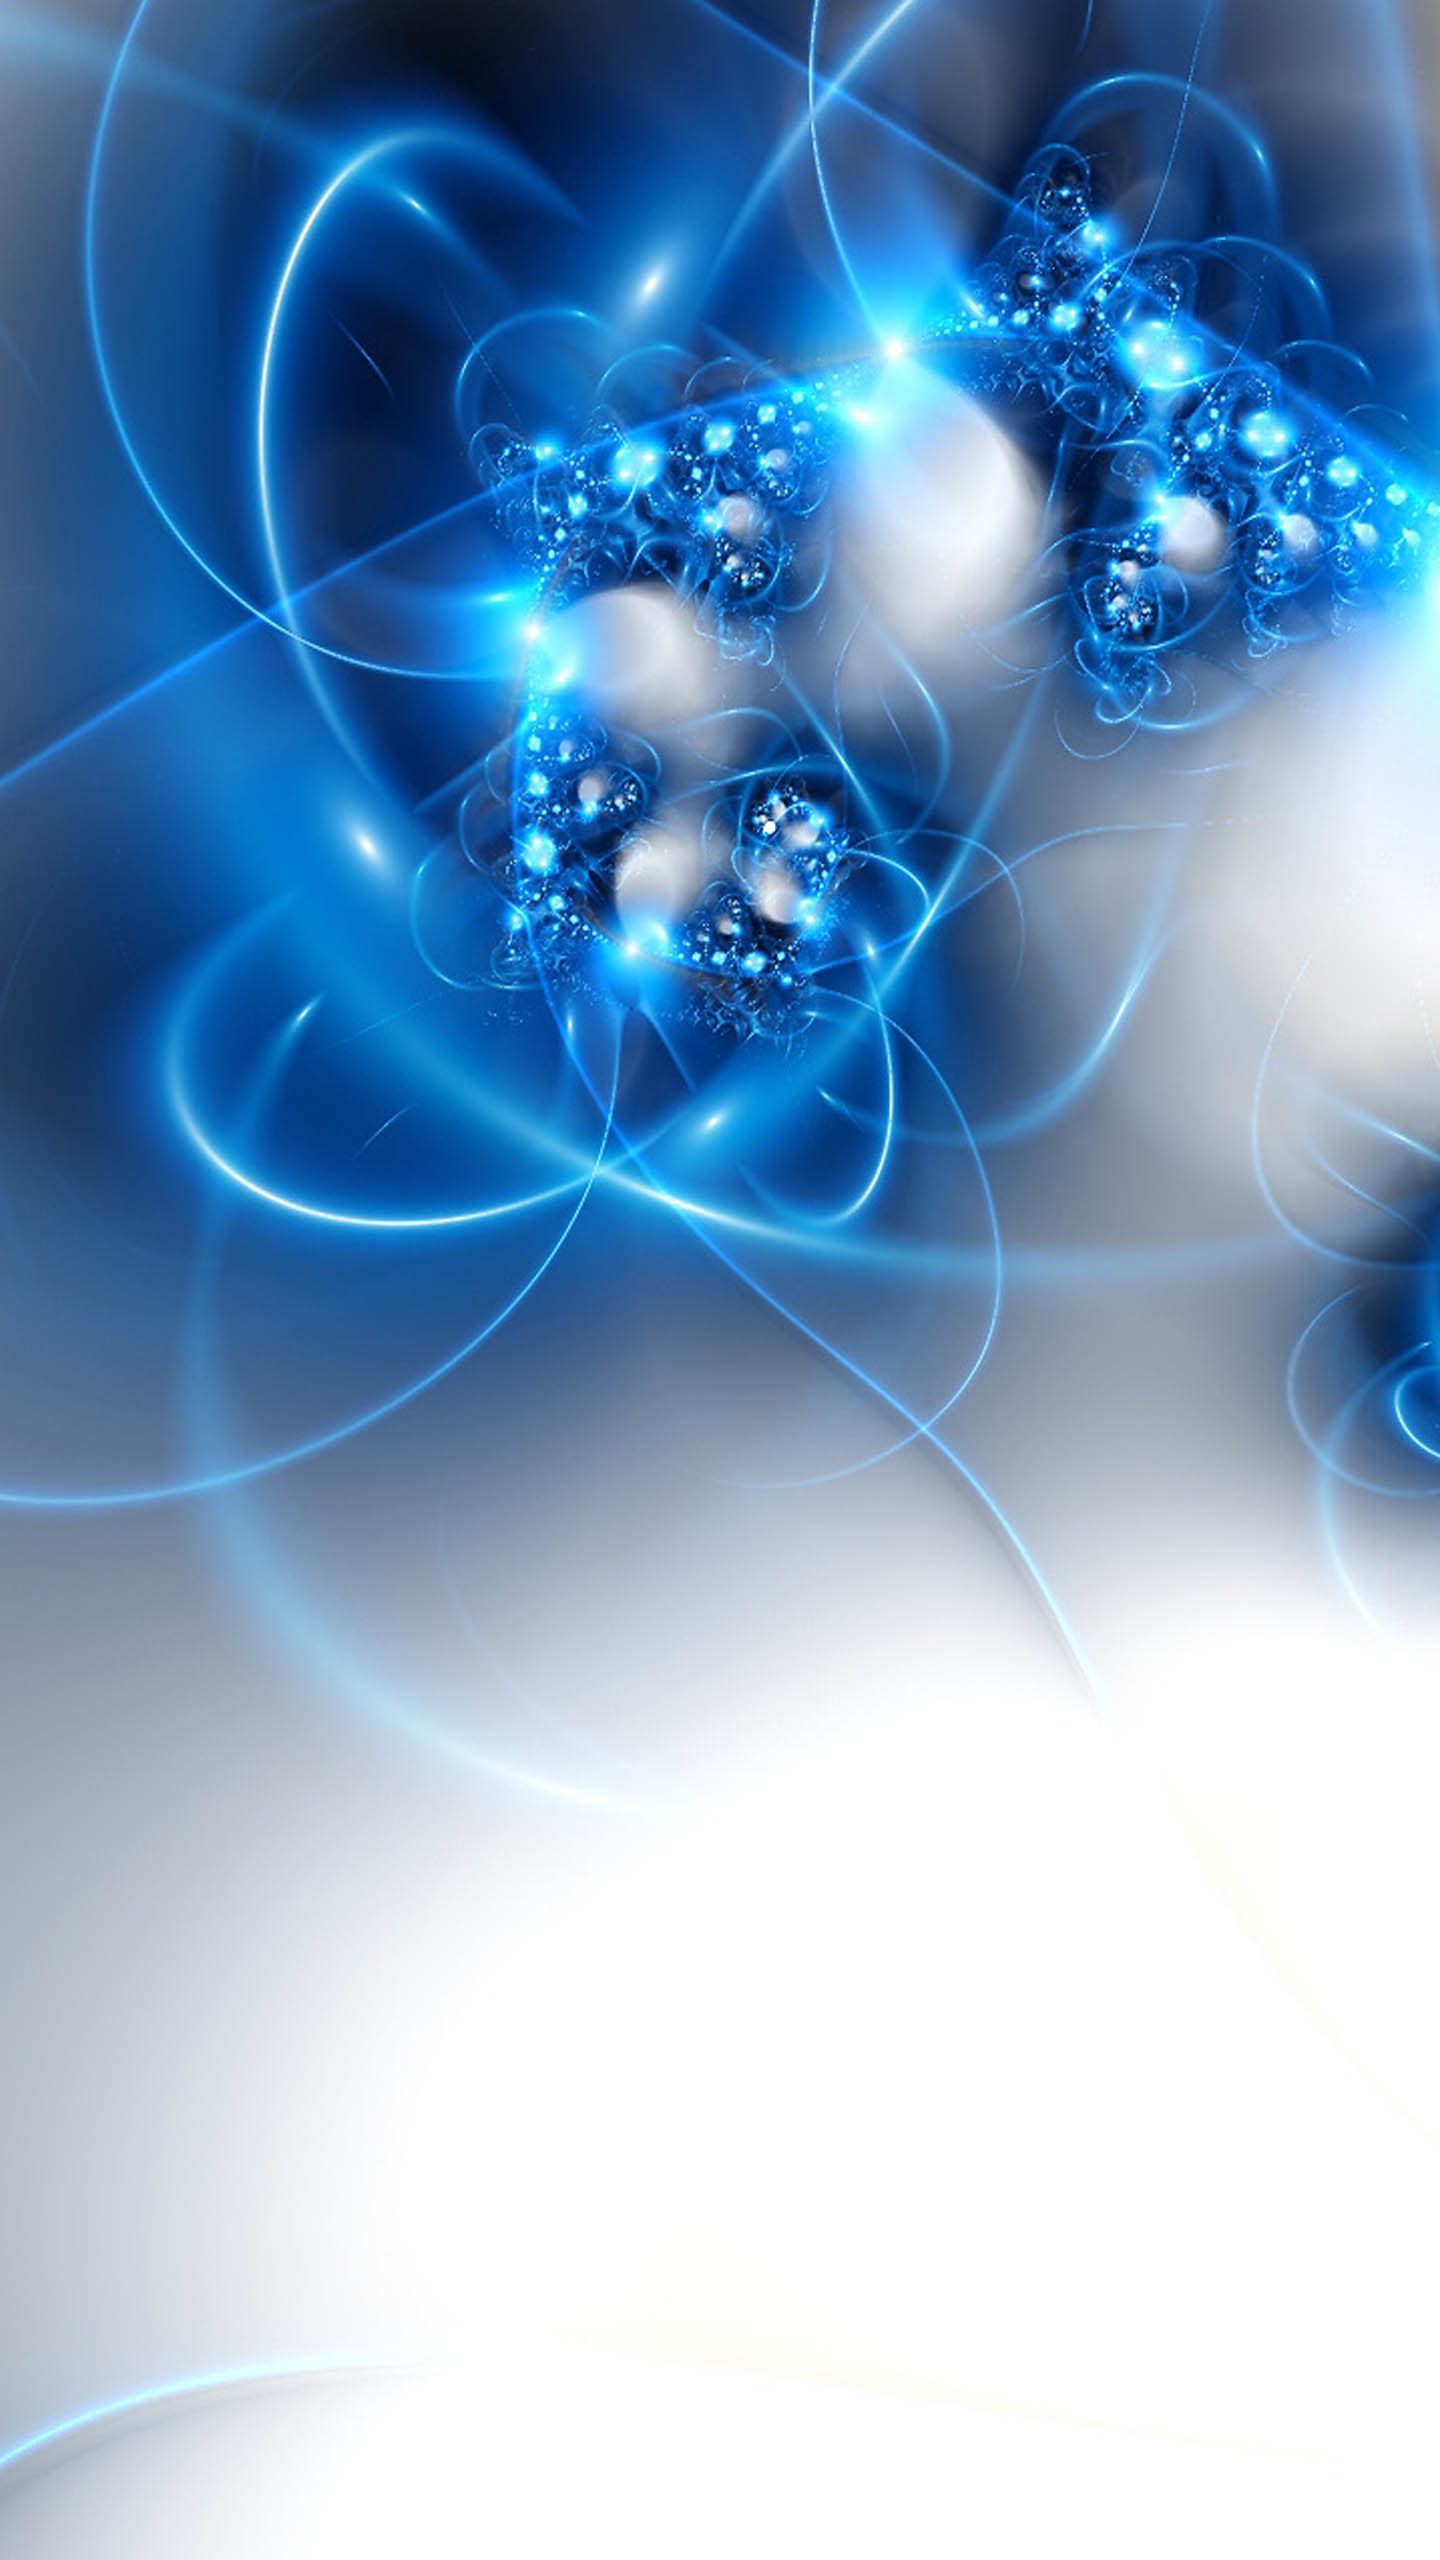 1440x2560 White Blue Abstract Wallpaper Â· Wallpaper For Samsung GalaxySamsung ...